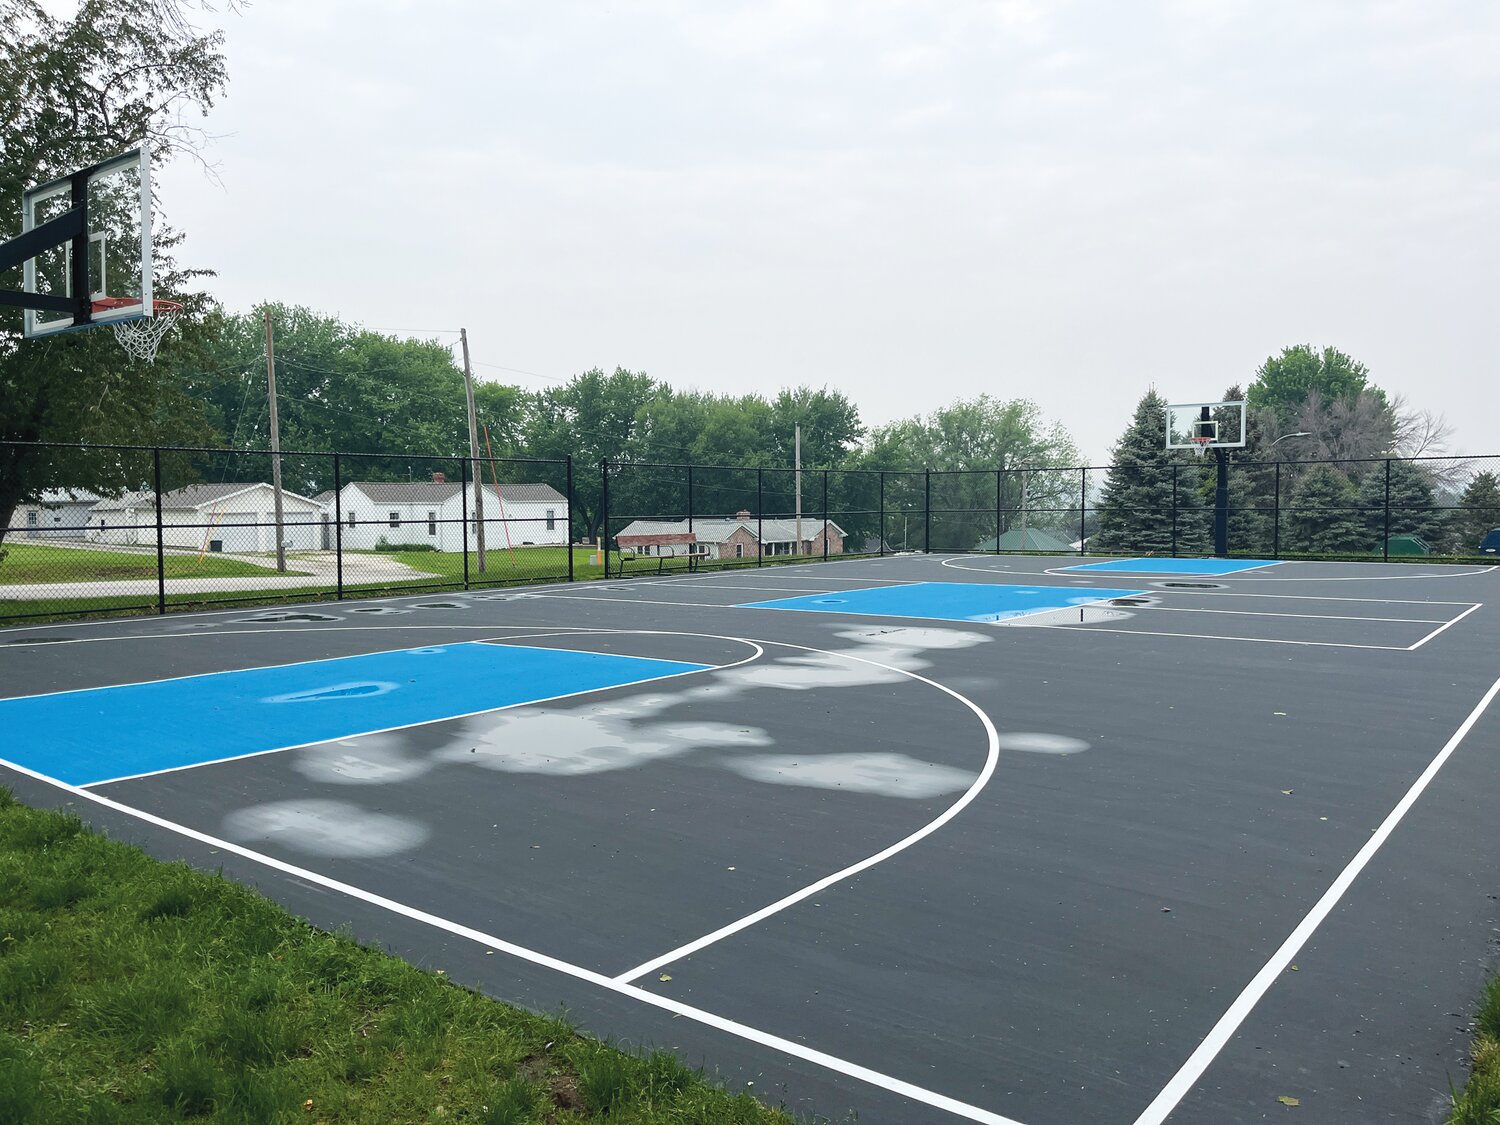 The basketball court at Dunlap City Park was recently resurfaced and painted to match the pool. Pickleball will also be able to be played on the court.